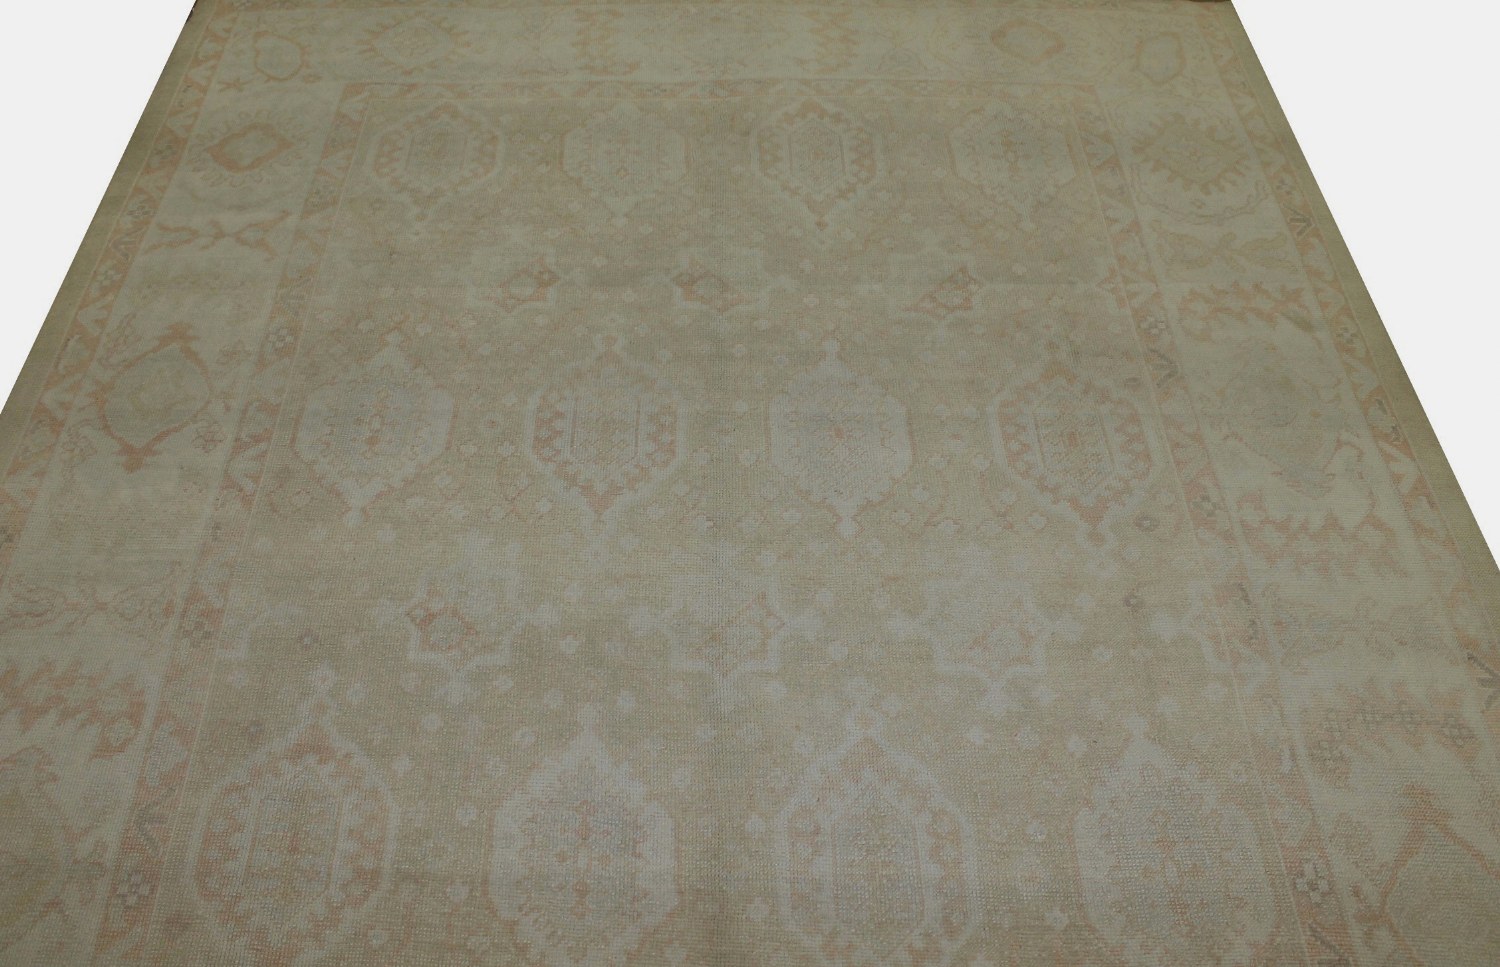 10x14 Oushak Hand Knotted Wool Area Rug - MR15242